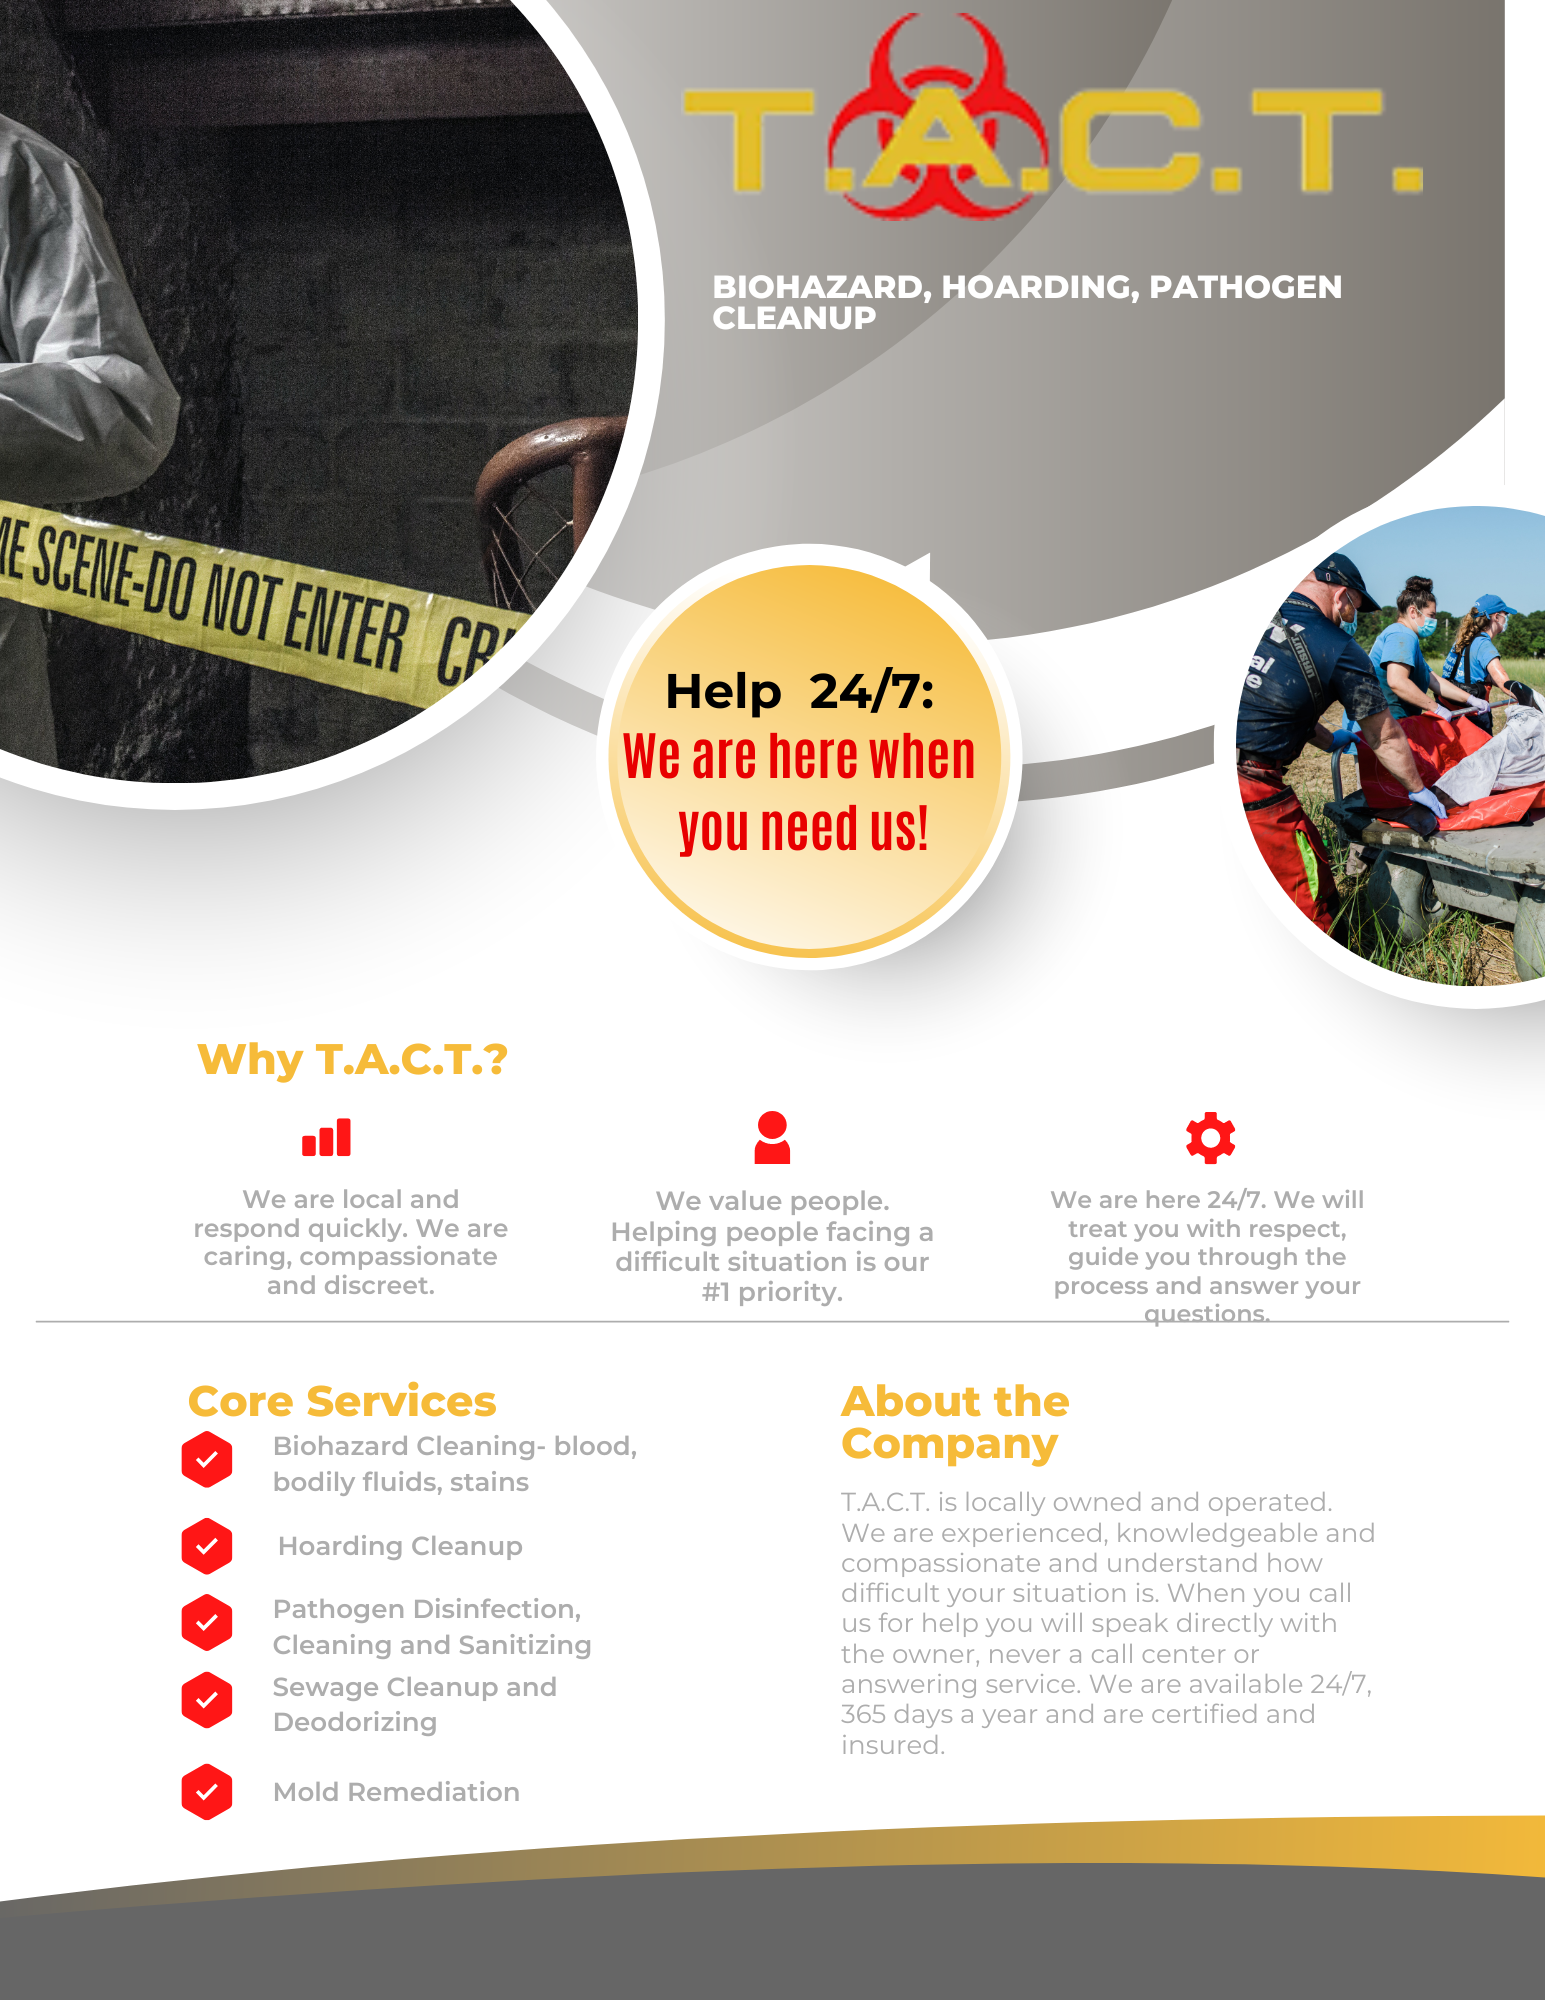 The Benefits of Hiring Professionals for 24/7 Biohazard Cleanup